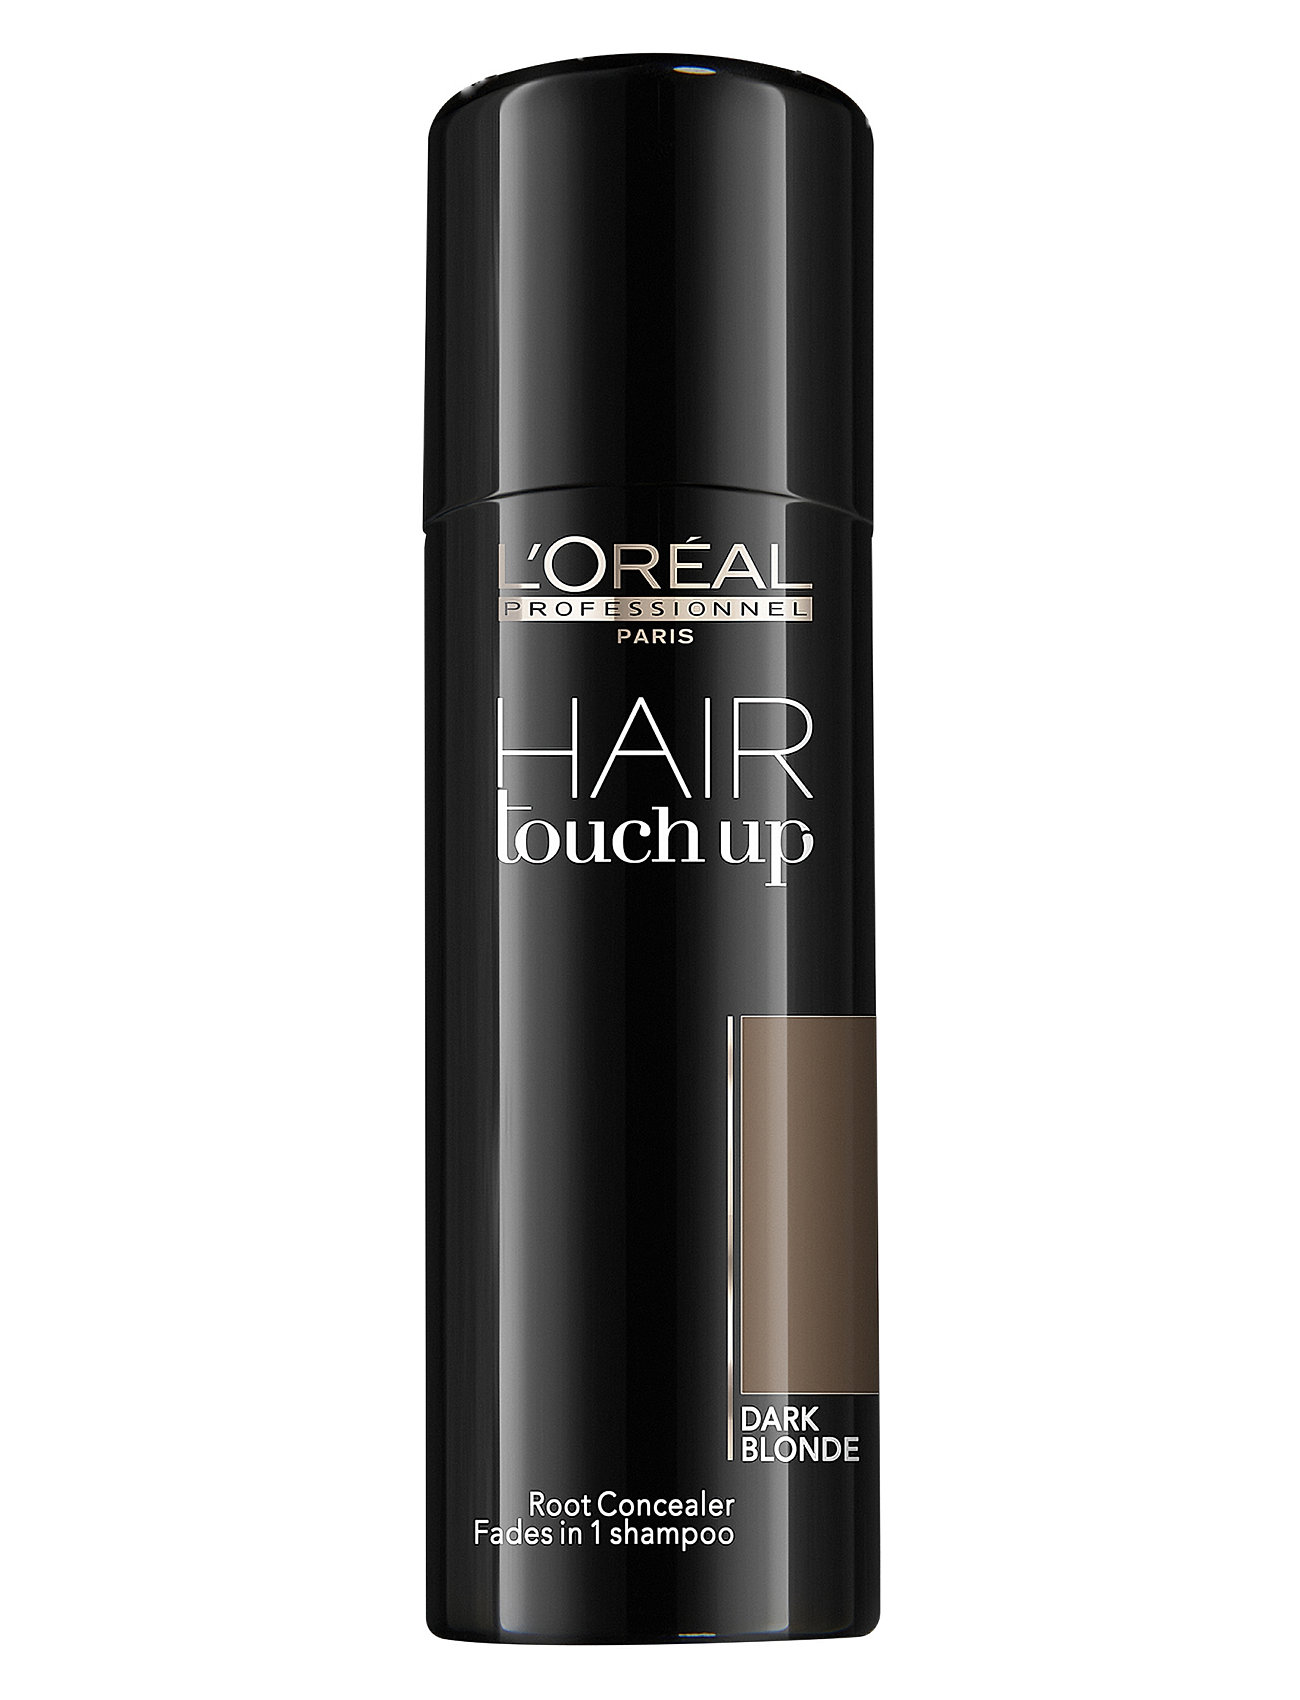 "L'Oréal Professionnel" "Hair Touch Up Dark Blonde Beauty Women Hair Styling Spray Nude L'Oréal